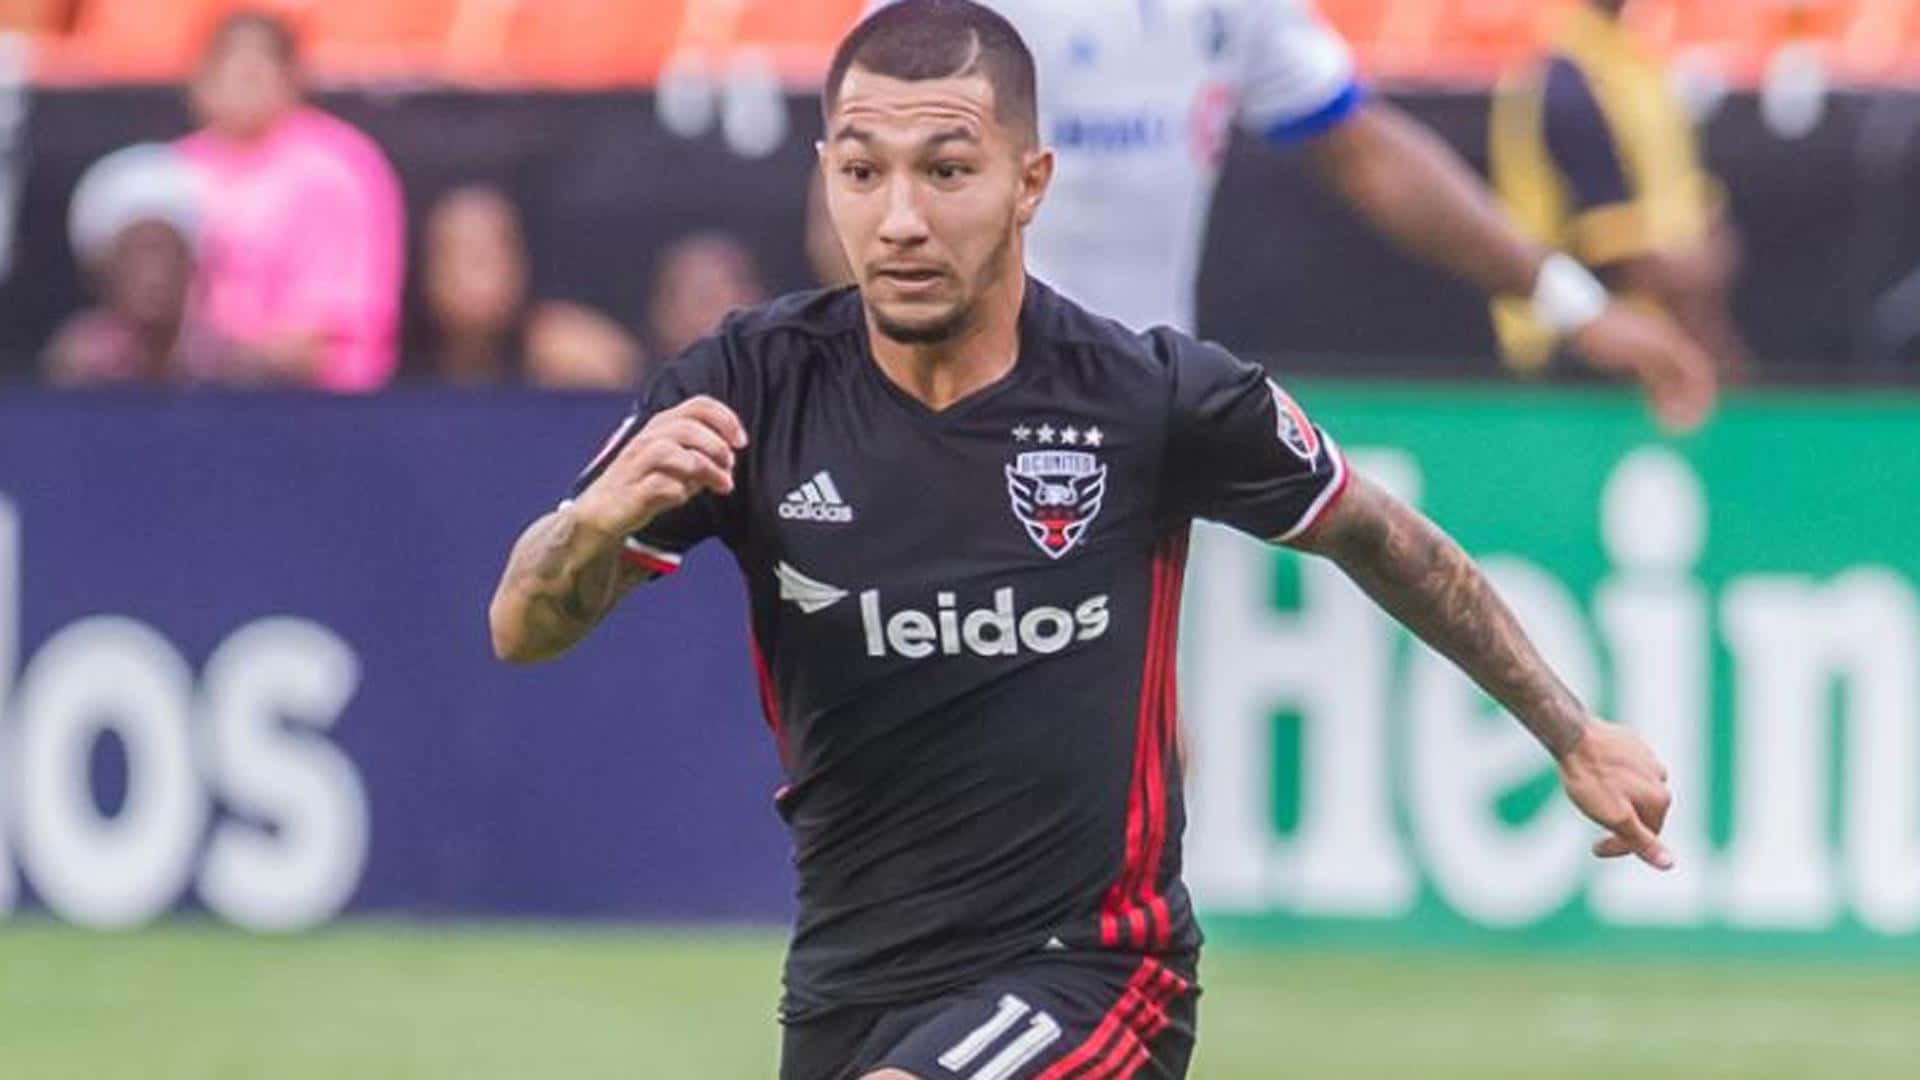 Luciano Acosta D.C. United Leidos Jersey Wallpaper